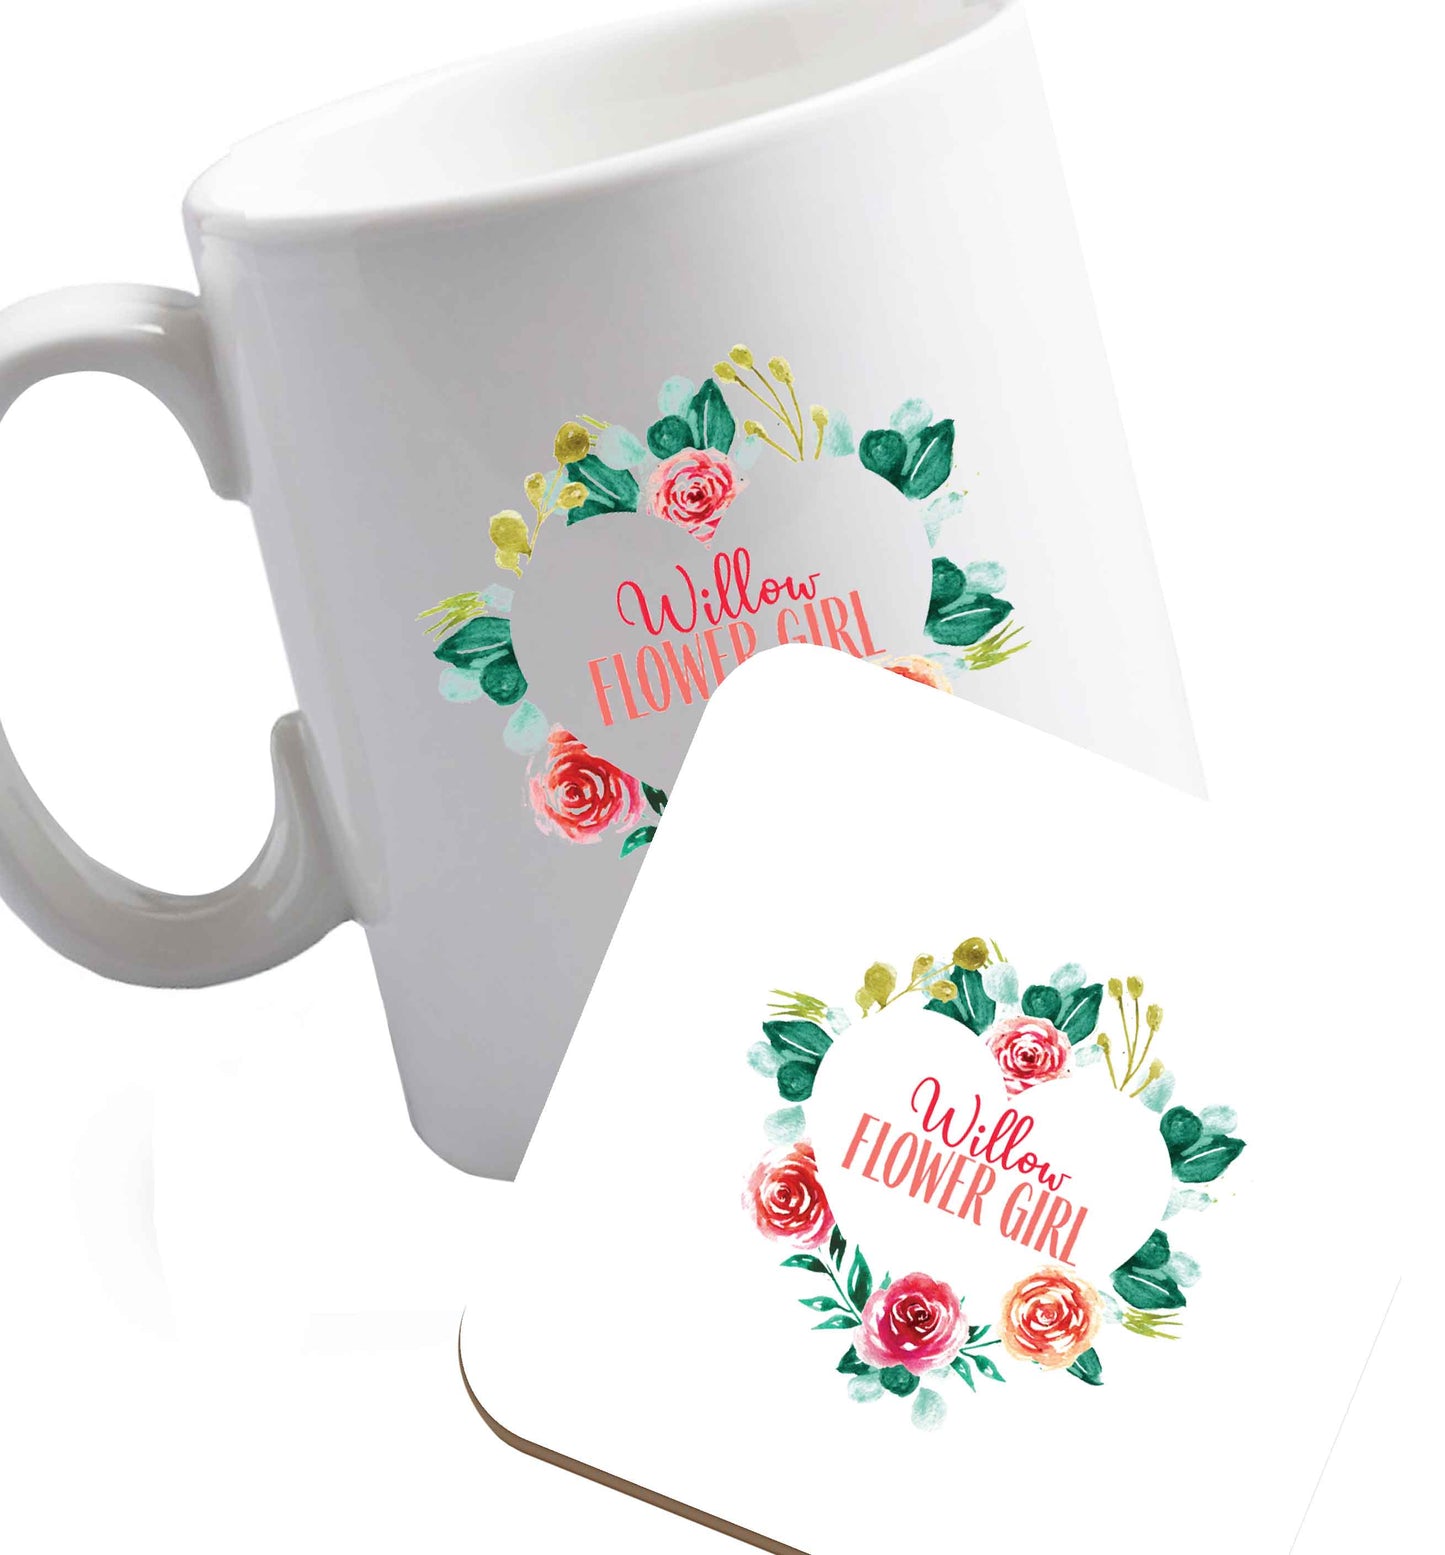 10 oz Perfect wedding guest favours or hen party gifts! Personalised bridal floral wreath designs, any name, any role!   ceramic mug and coaster set right handed